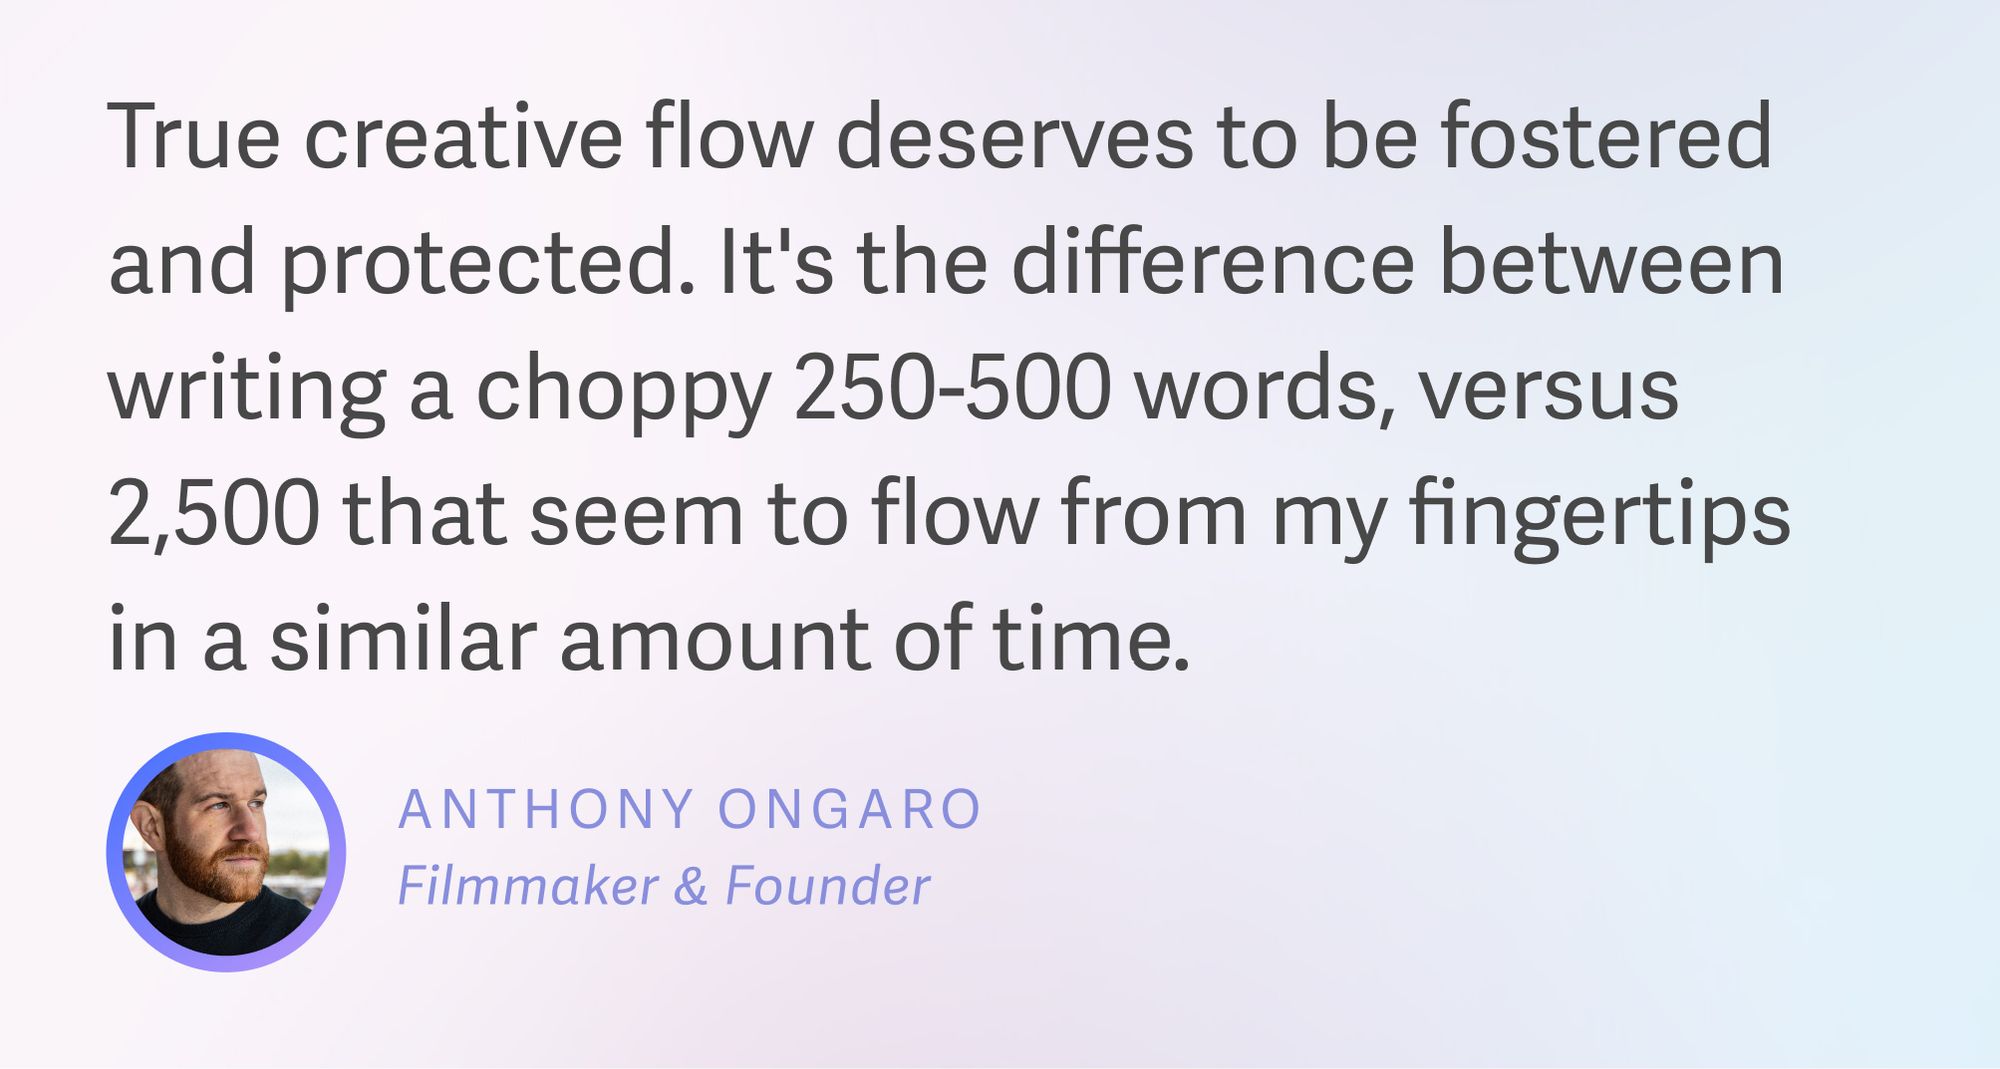 Anthony Ongaro on protecting the creative flow.